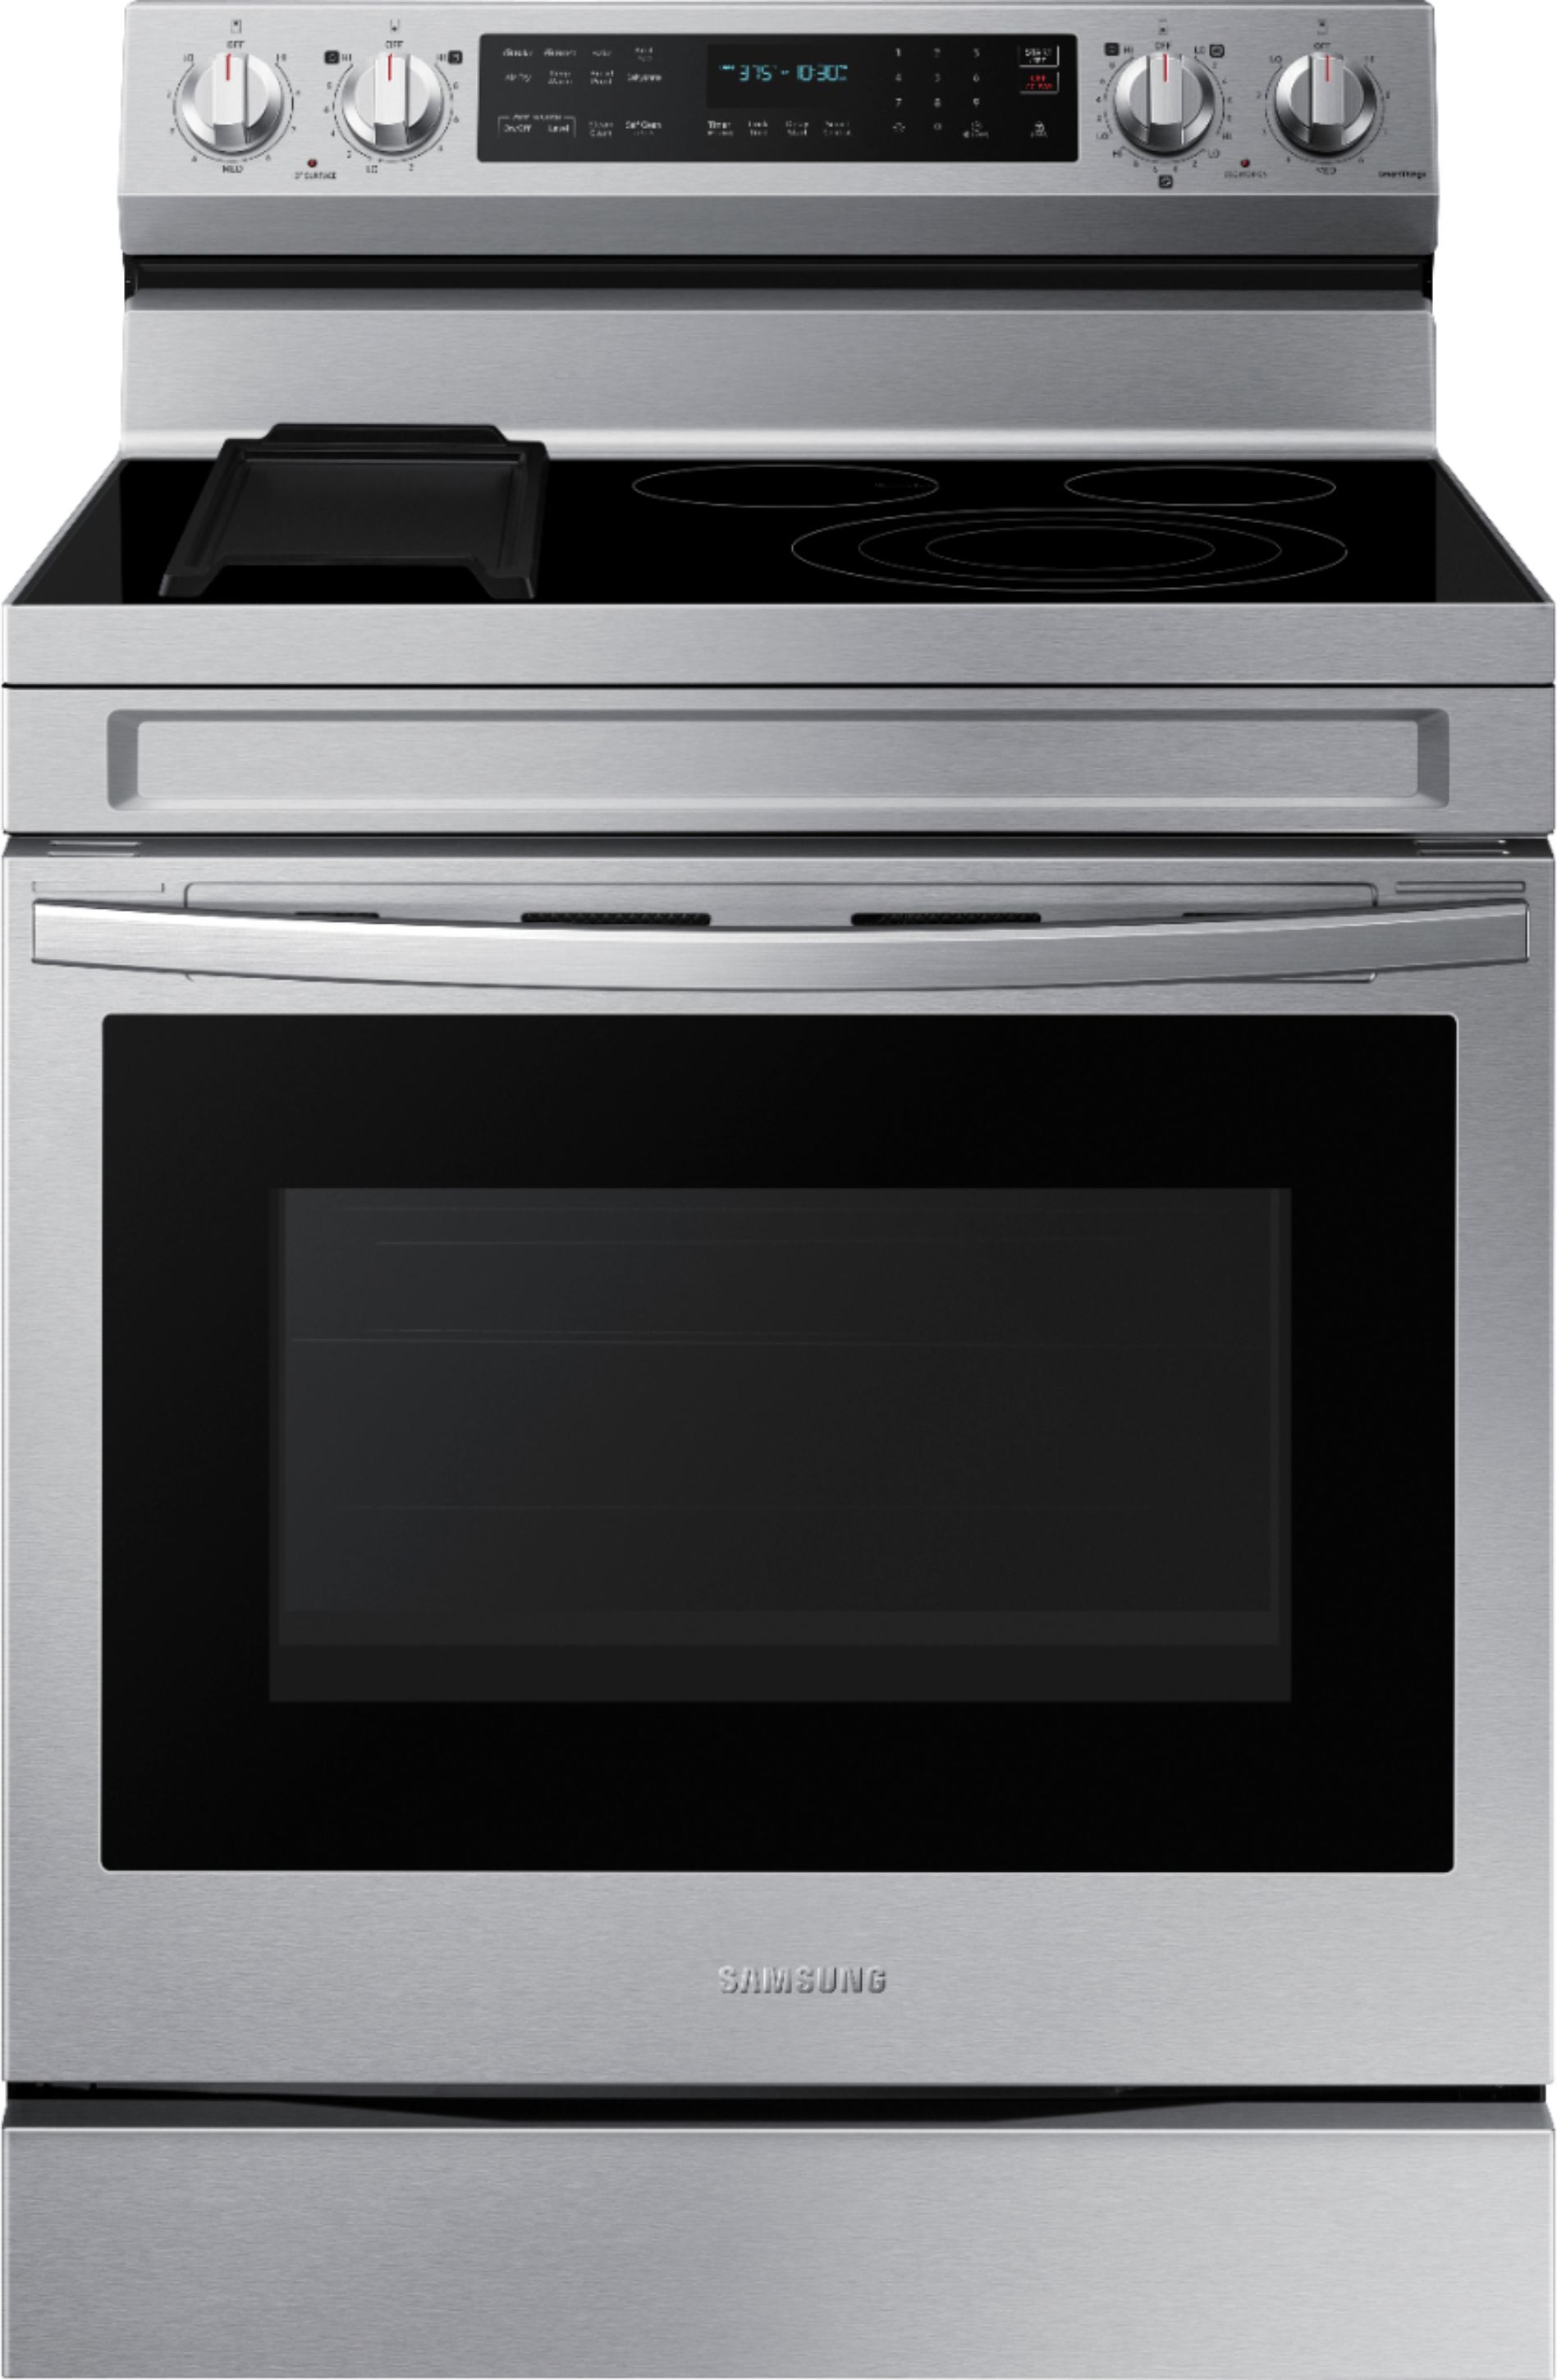 How to Preheat Samsung Oven? 